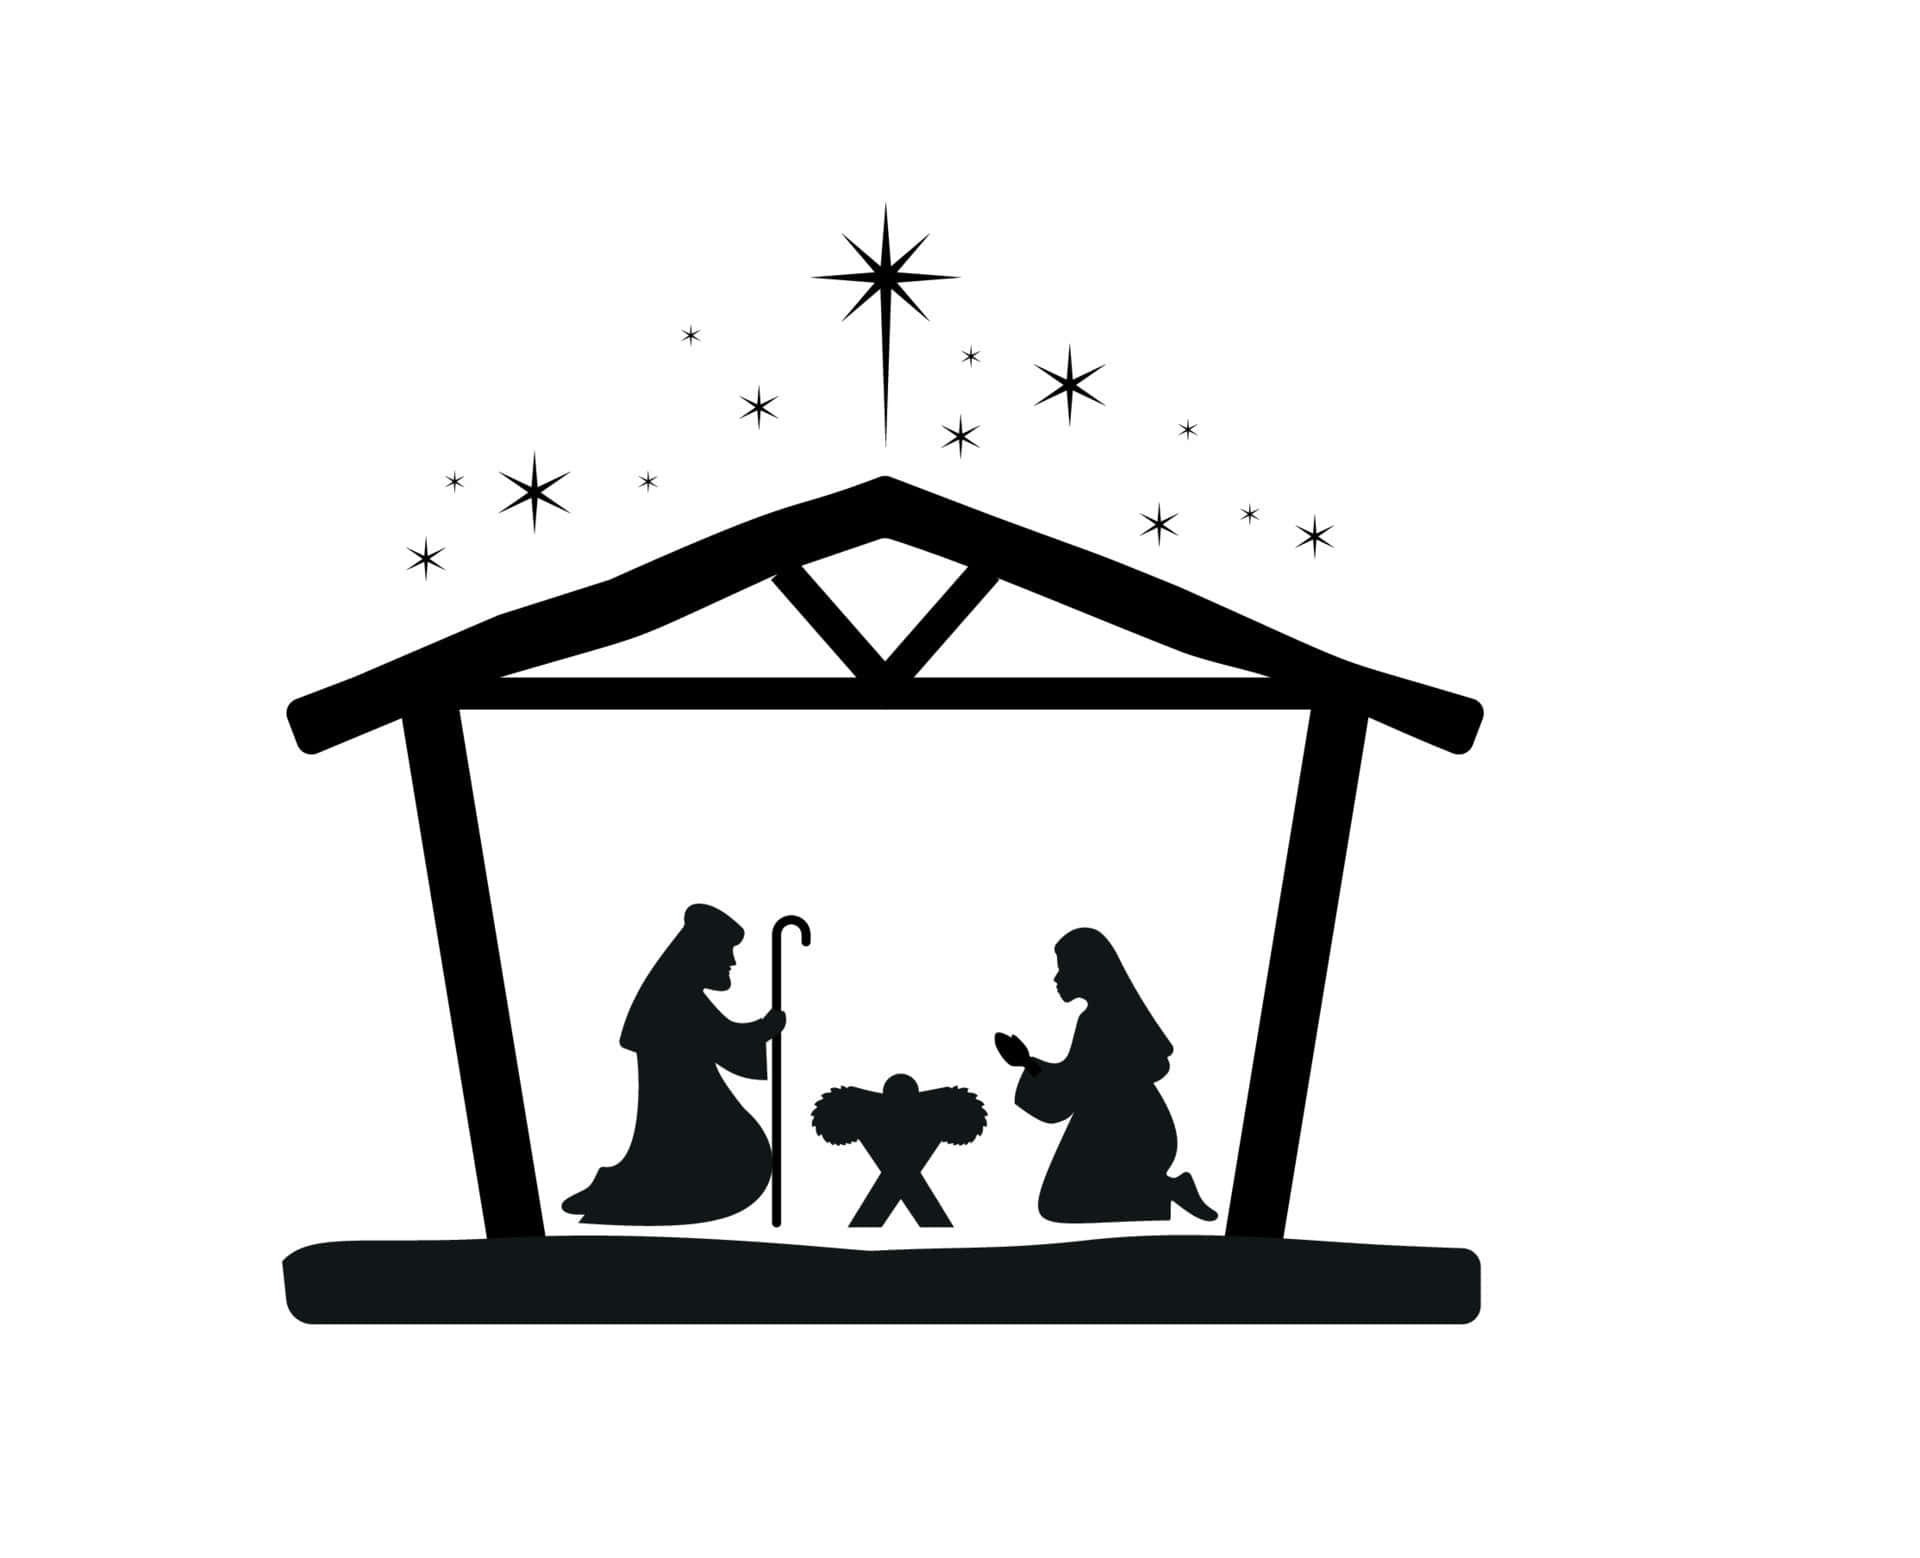 A mother and her daughter reflect on the meaning of Christmas